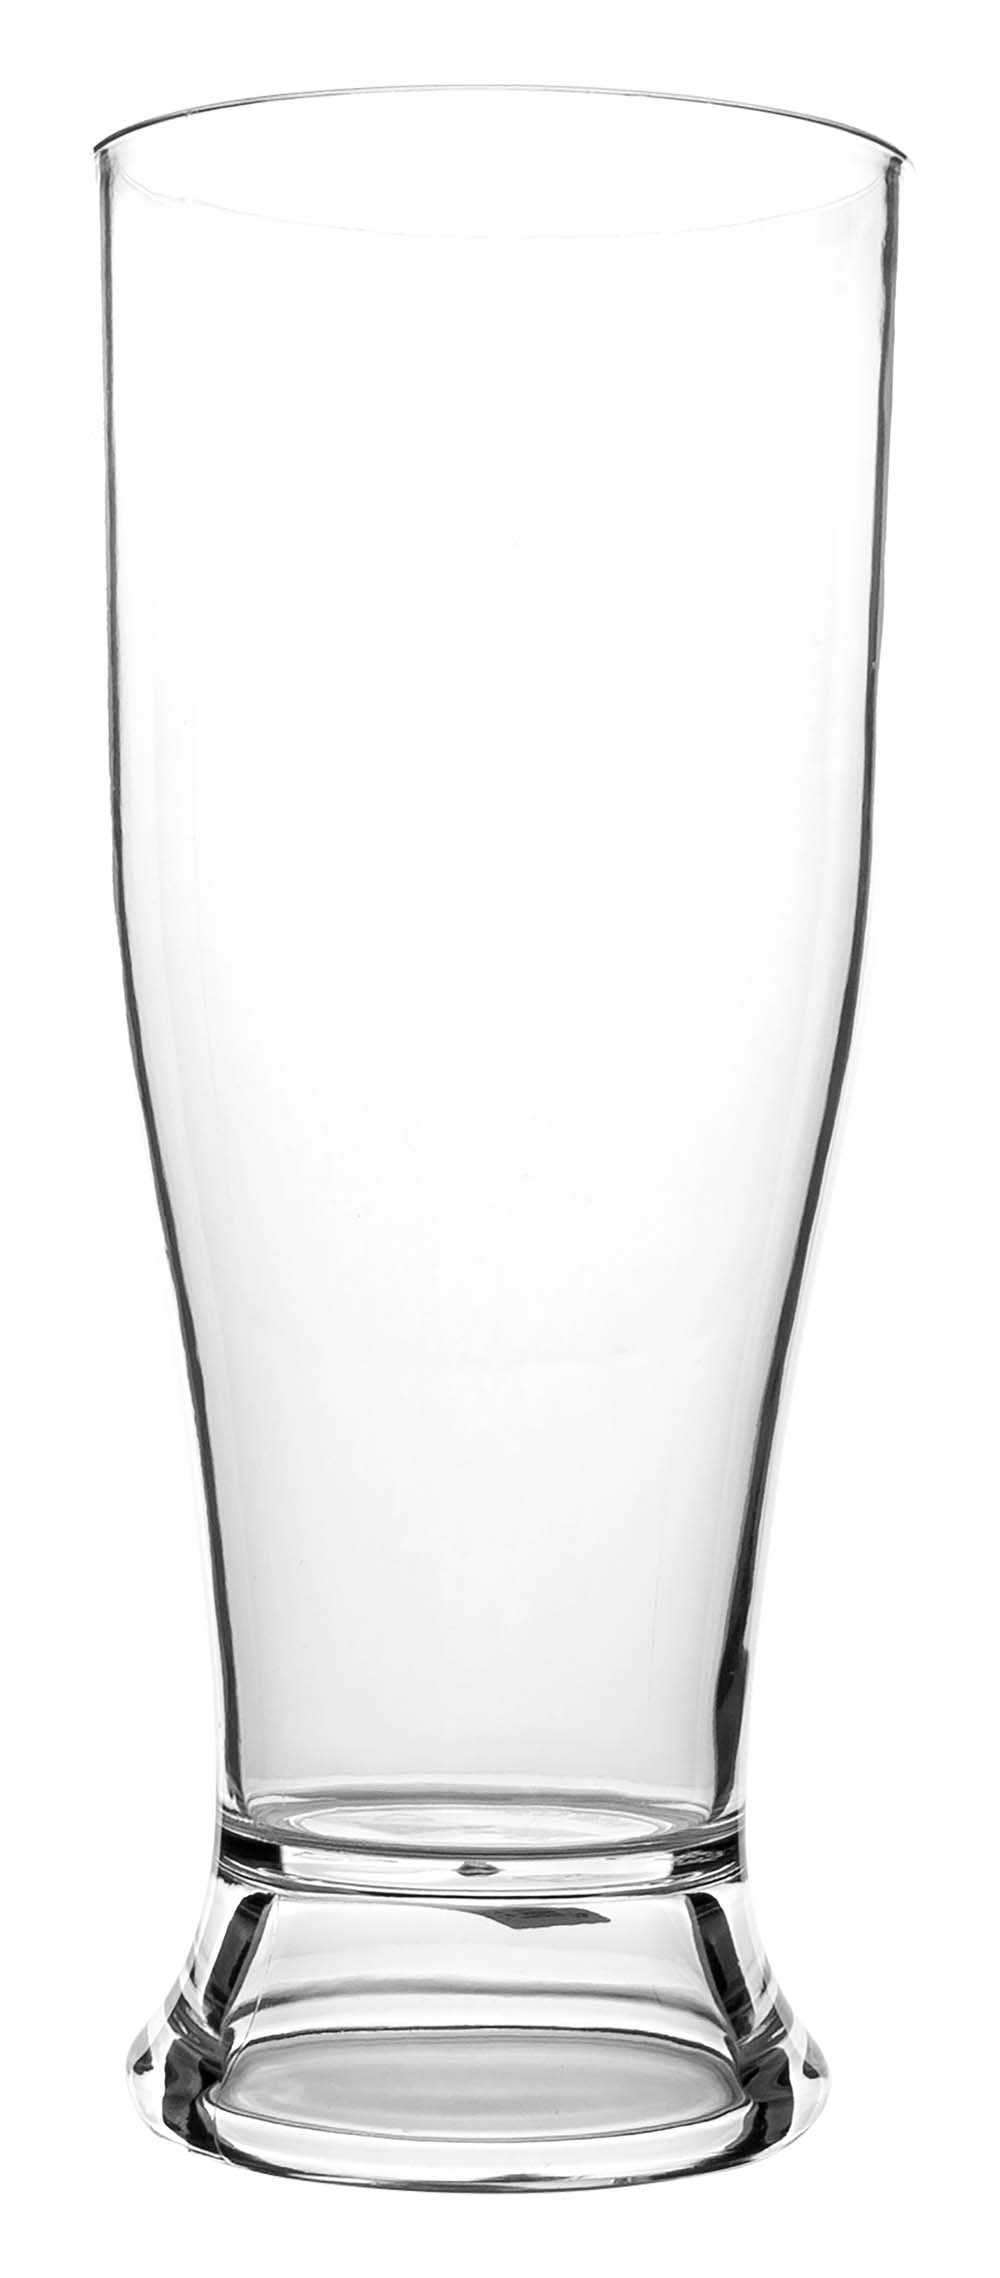 6101378 An extra sturdy beer glass. Made of 100% polycarbonate. This makes the glasses almost unbreakable, light weight and scratch proof. This glass is also dishwasher safe.